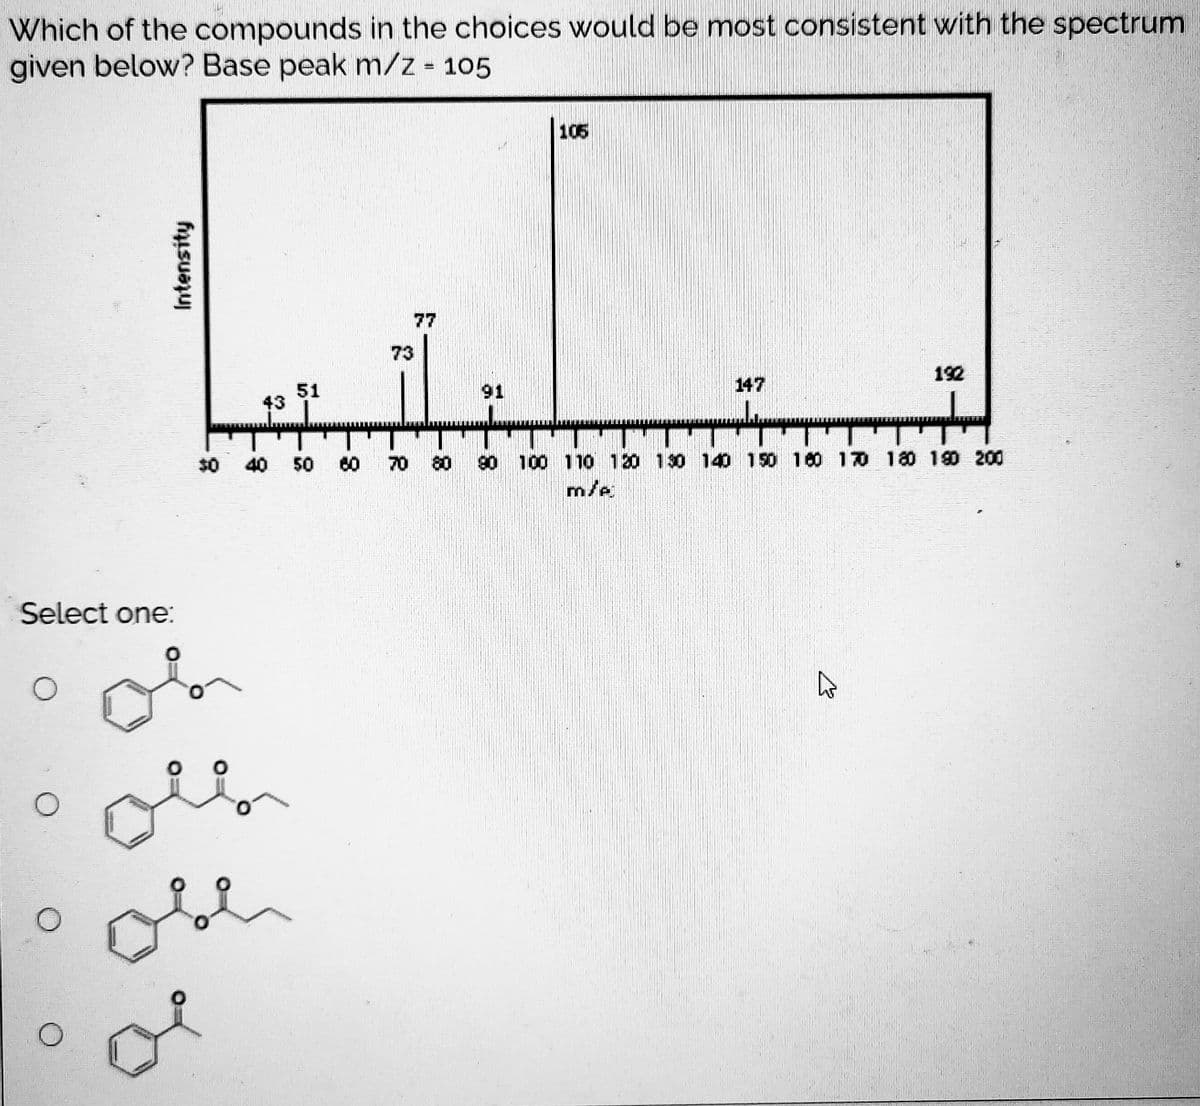 Which of the compounds in the choices would be most consistent with the spectrum
given below? Base peak m/z 105
105
77
73
192
147
51
43
91
$0
40 50
70
80
90 100 110 120 130 140 150 160 170 180 19O 200
m/e
Select one:
of
Intensity
8-
